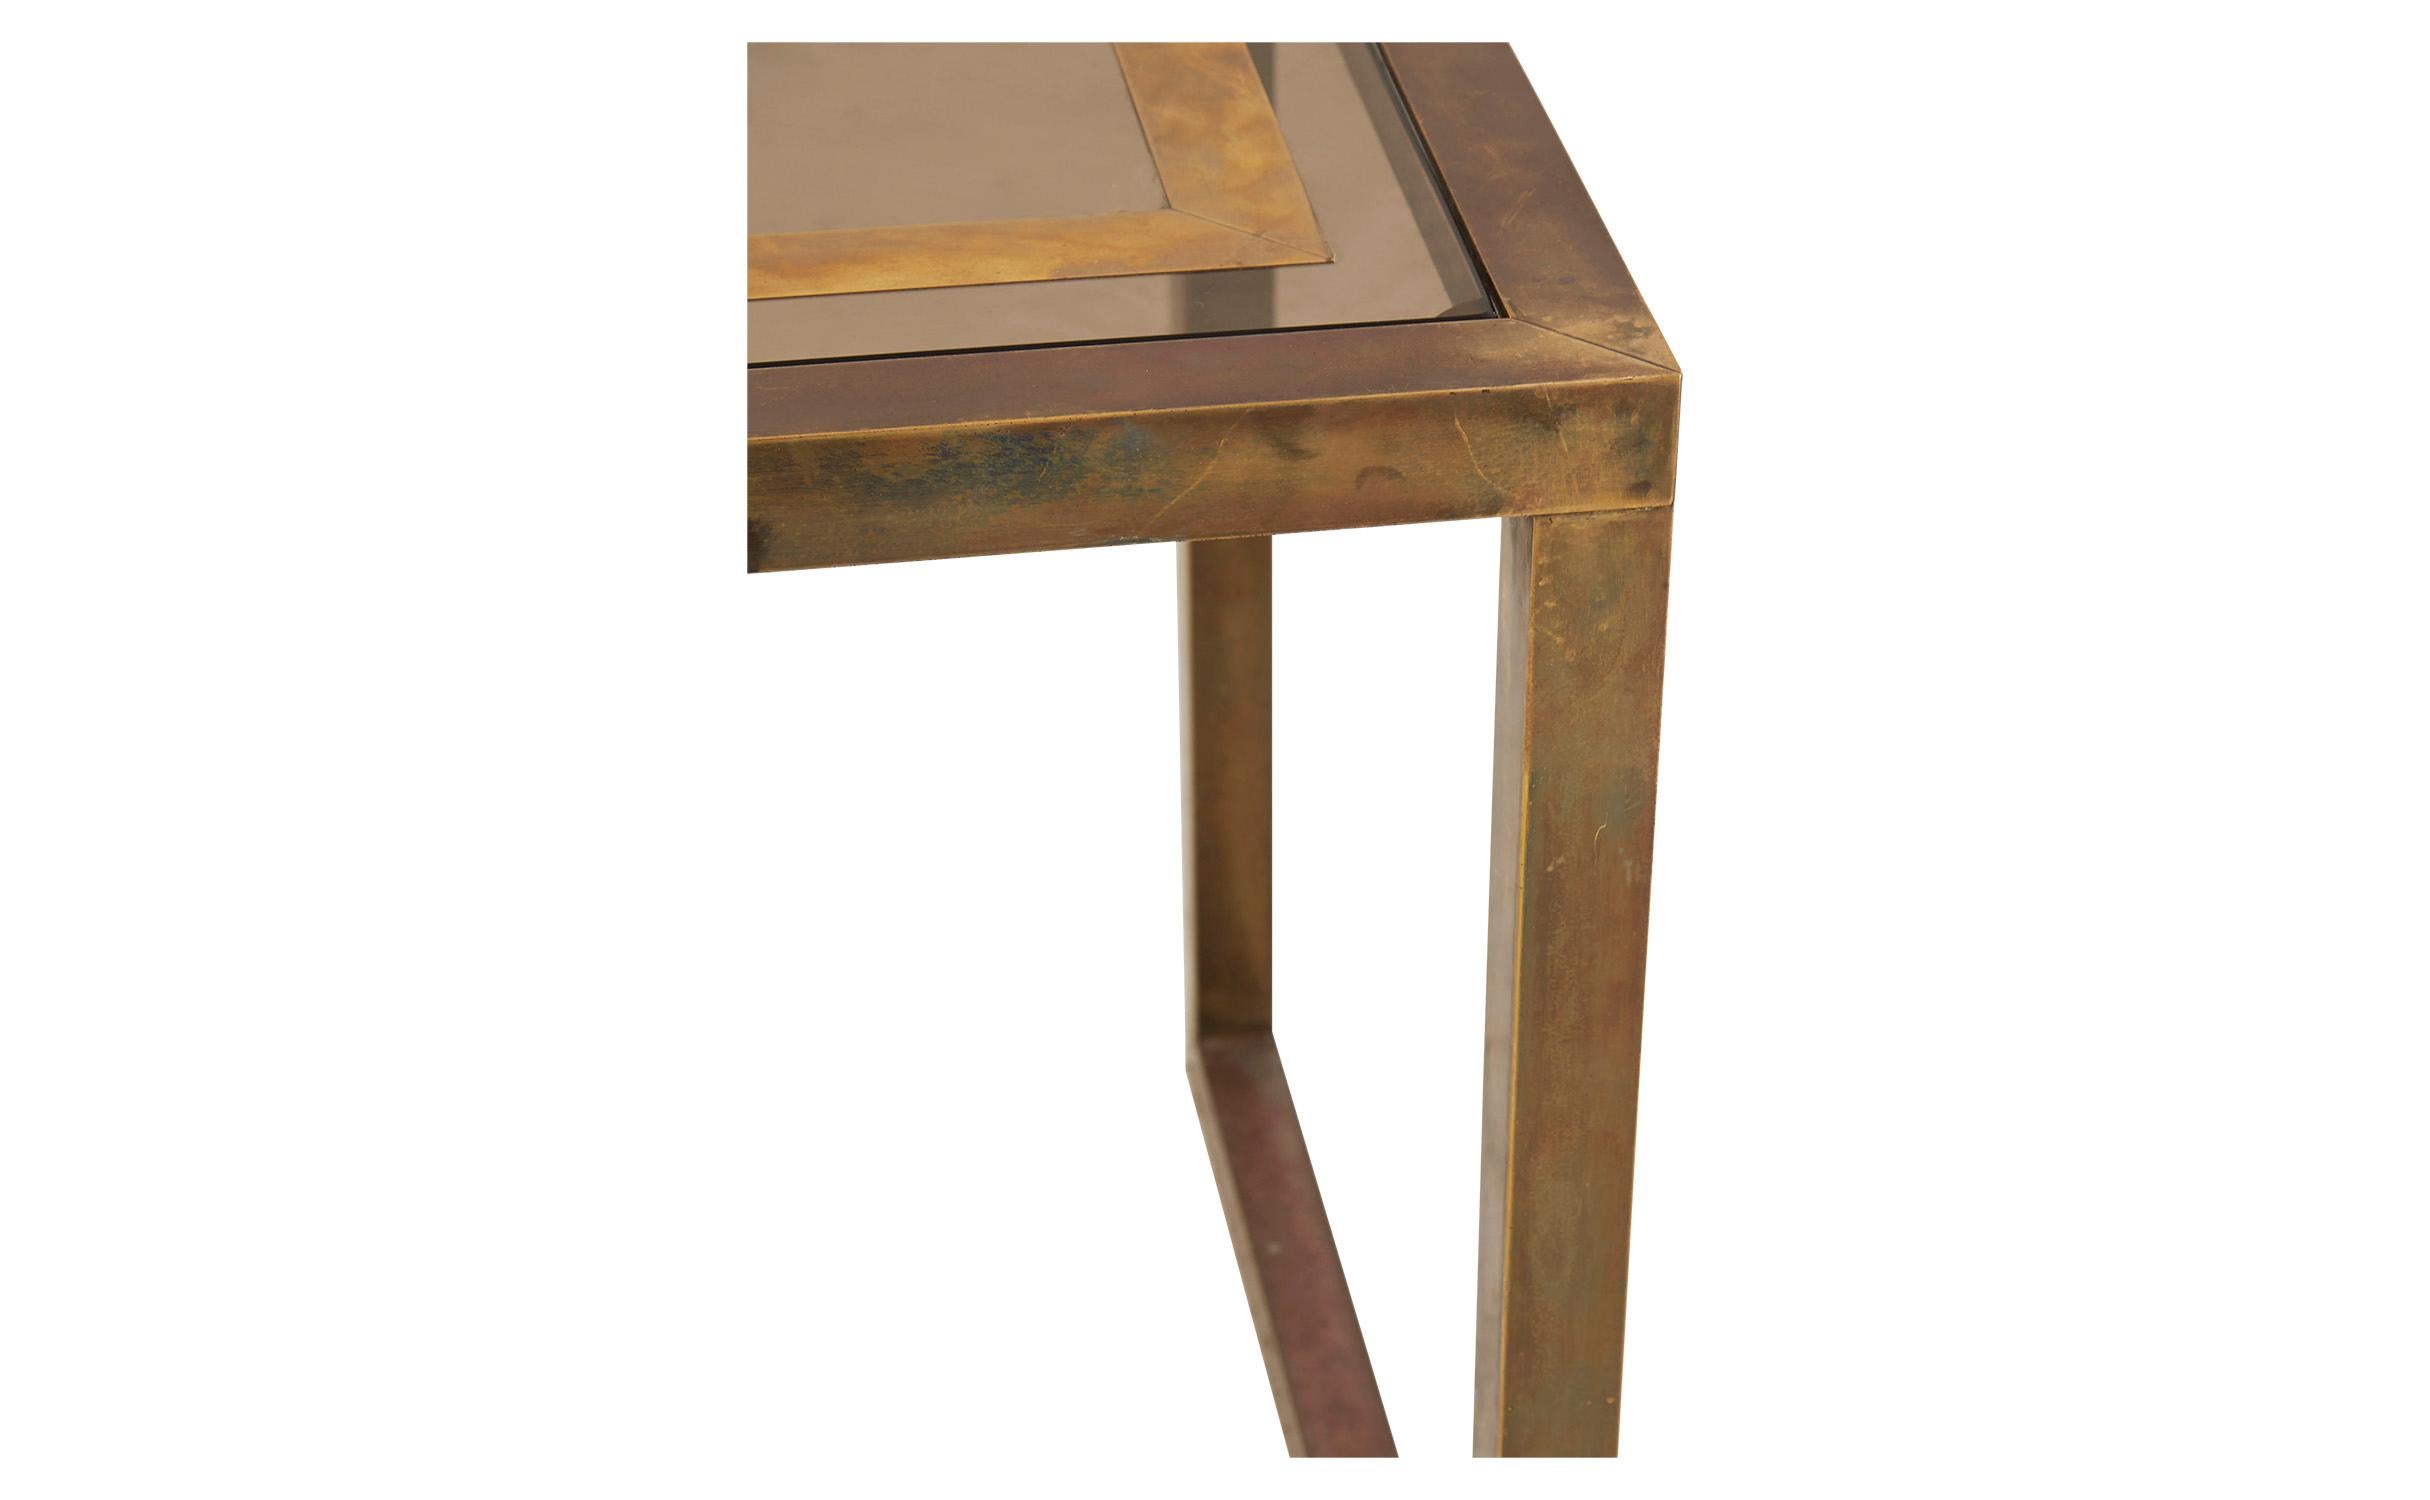 Spanish Midcentury Brass and Smoked Glass Console Table 1